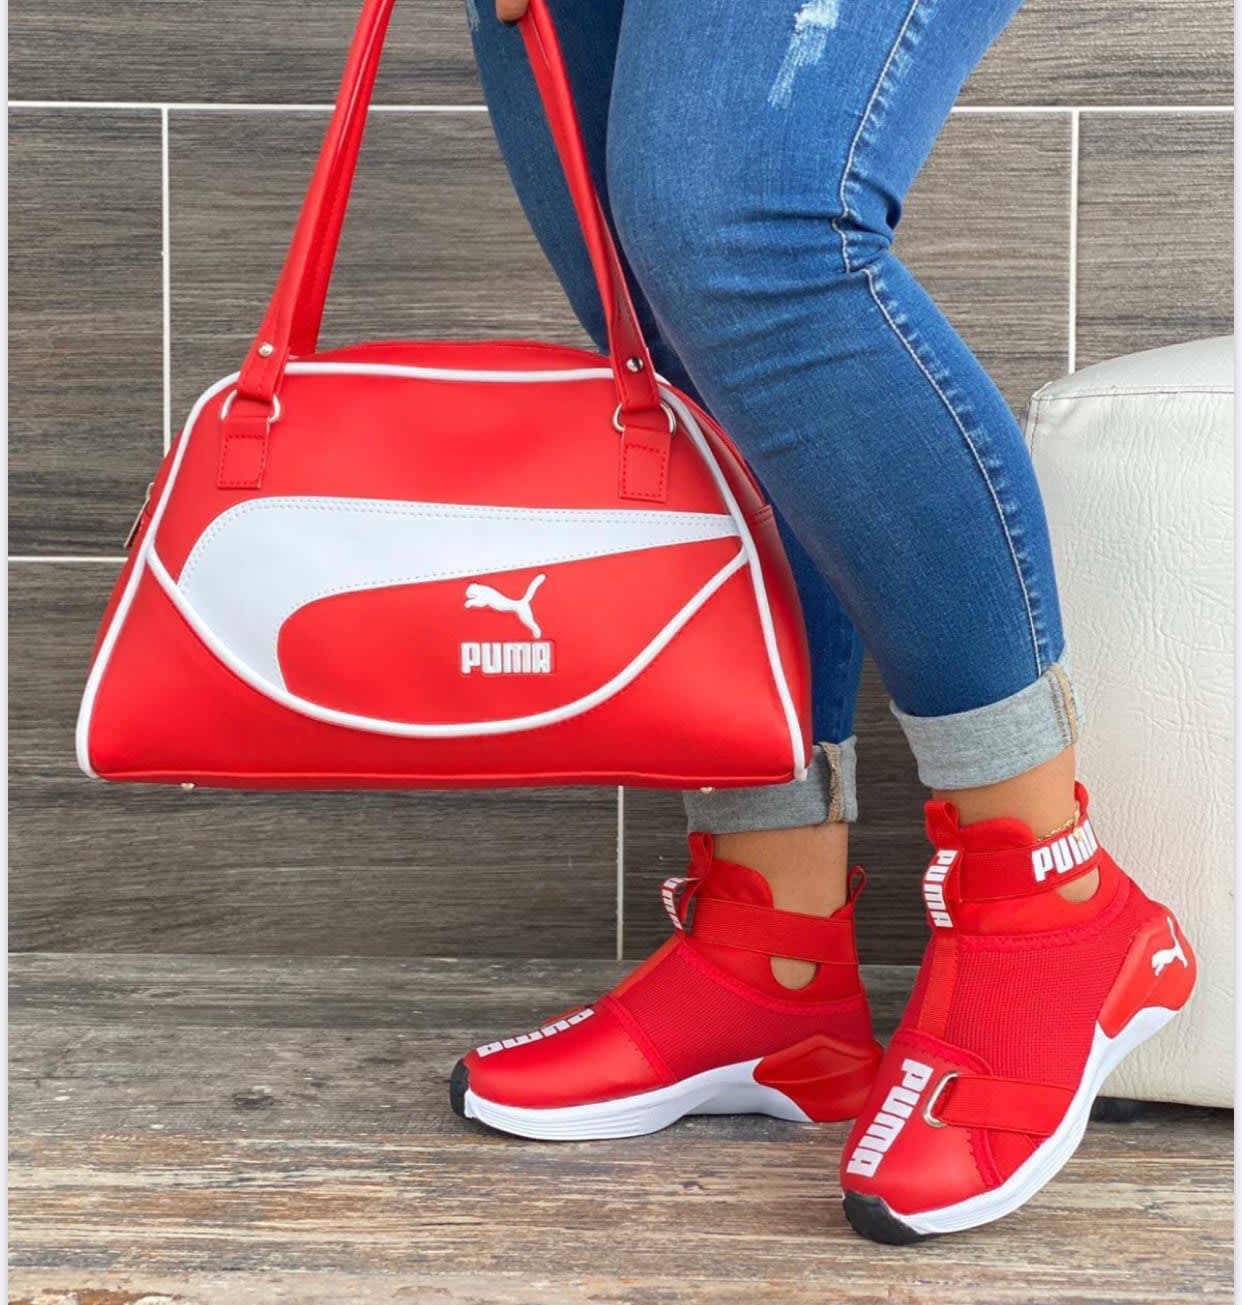 Nike, Bags, Matching Purse And Shoes Sets